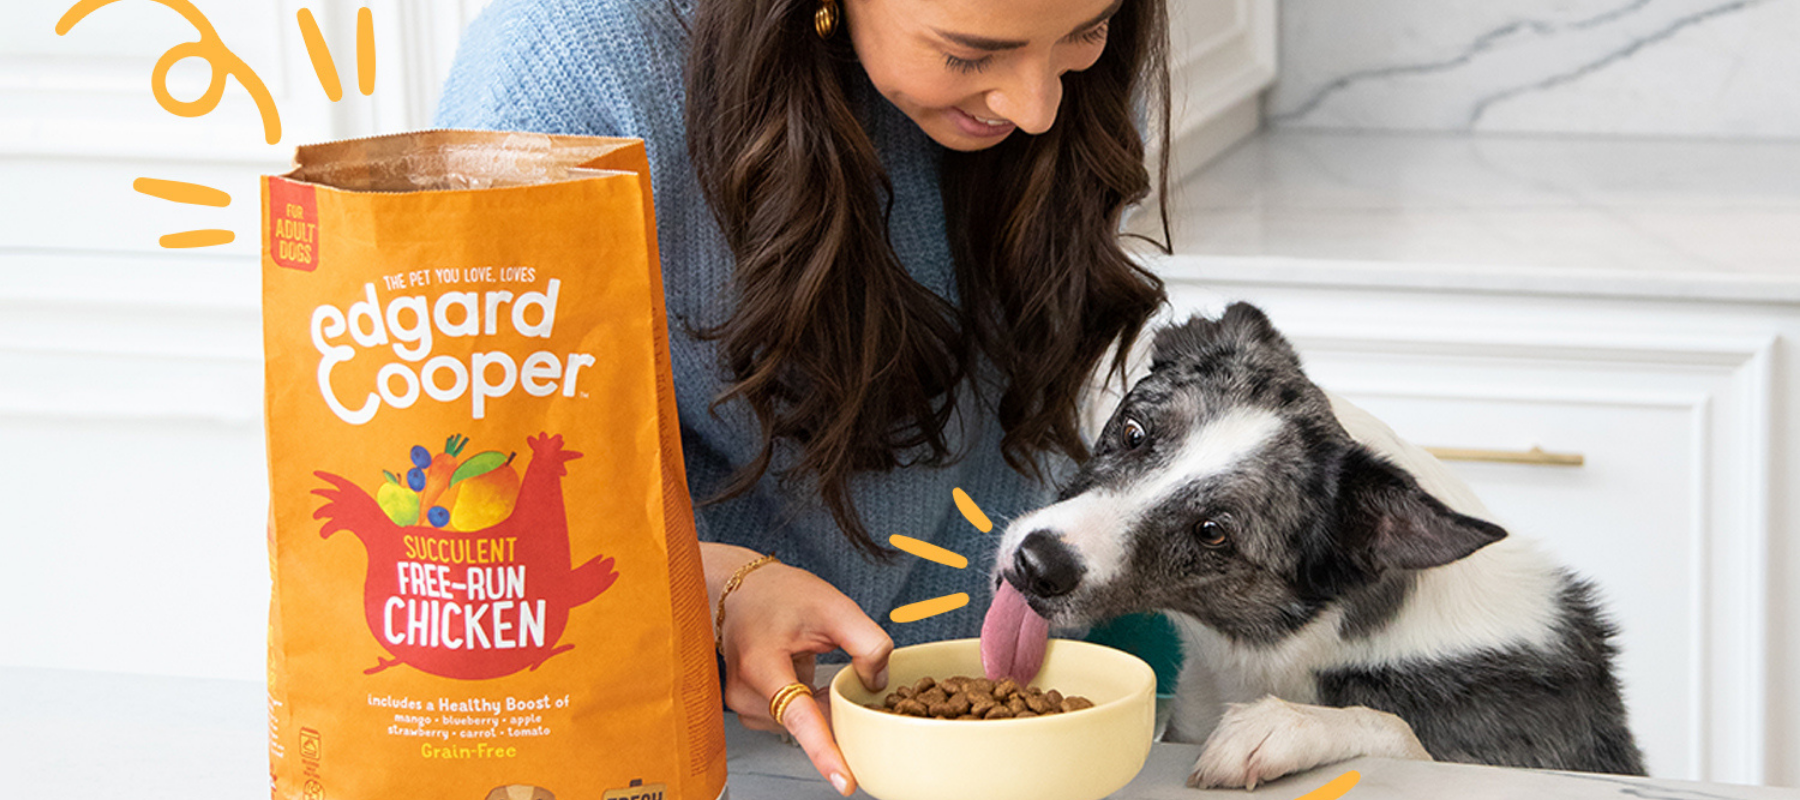 PET FOOD YOU CAN FEEL GOOD ABOUT image